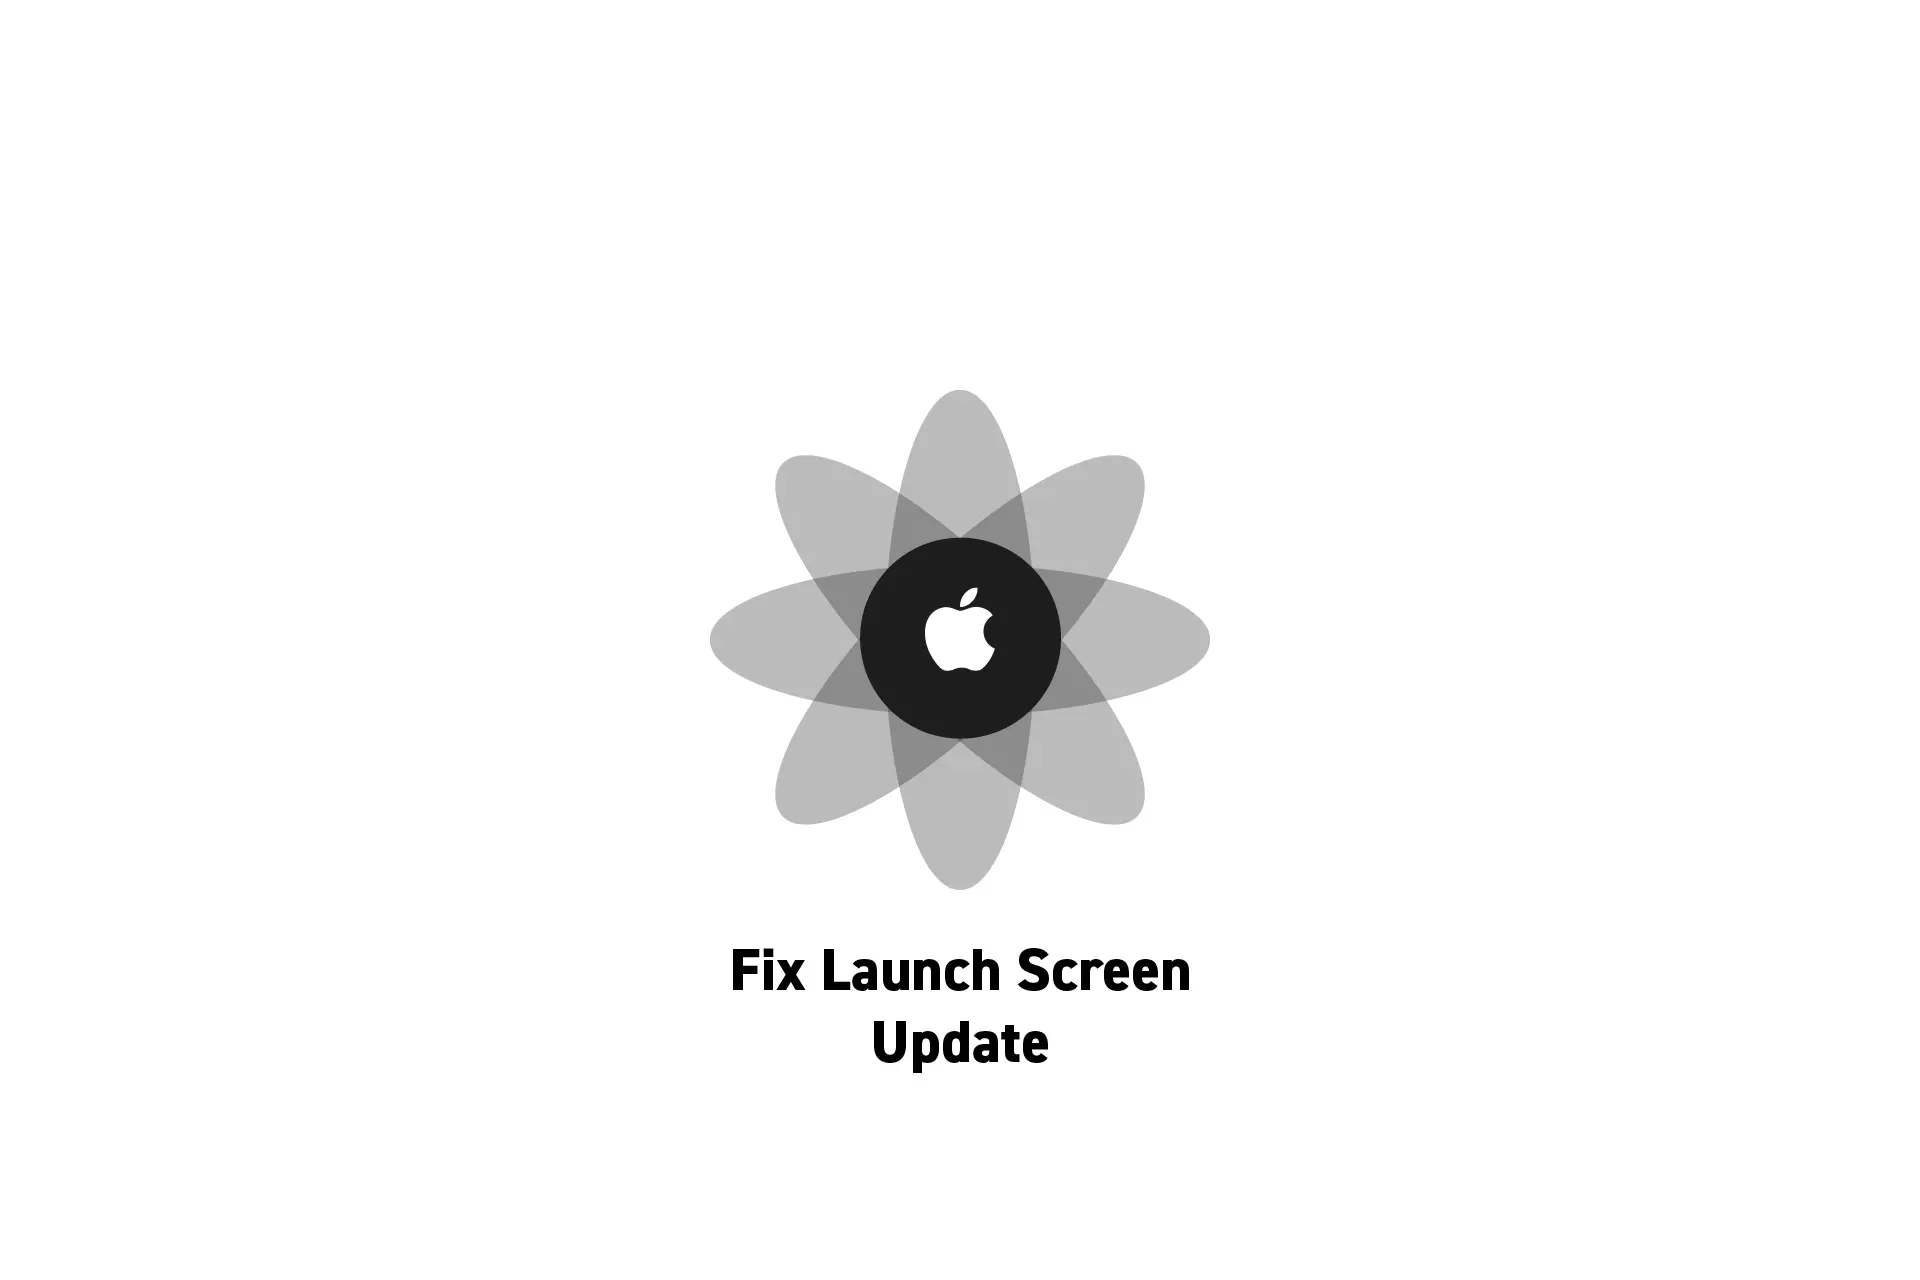 A flower that represents Apple with the text "Fix Launch Screen Update" beneath it.